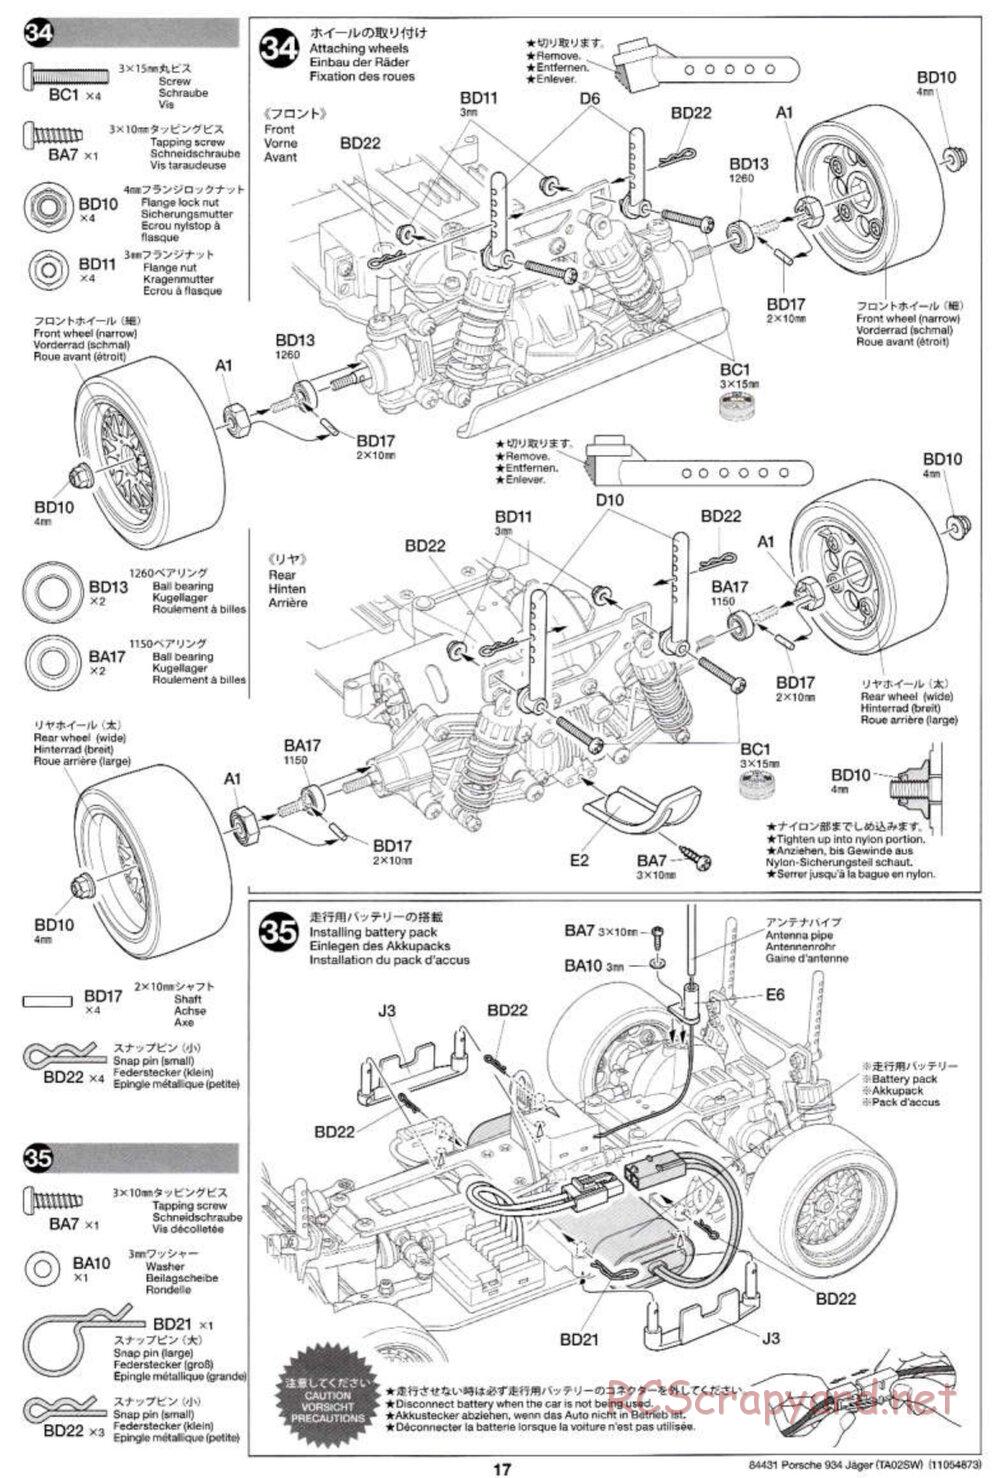 Tamiya - Porsche Turbo RSR Type 934 Jagermeister - TA-02SW Chassis - Manual - Page 17